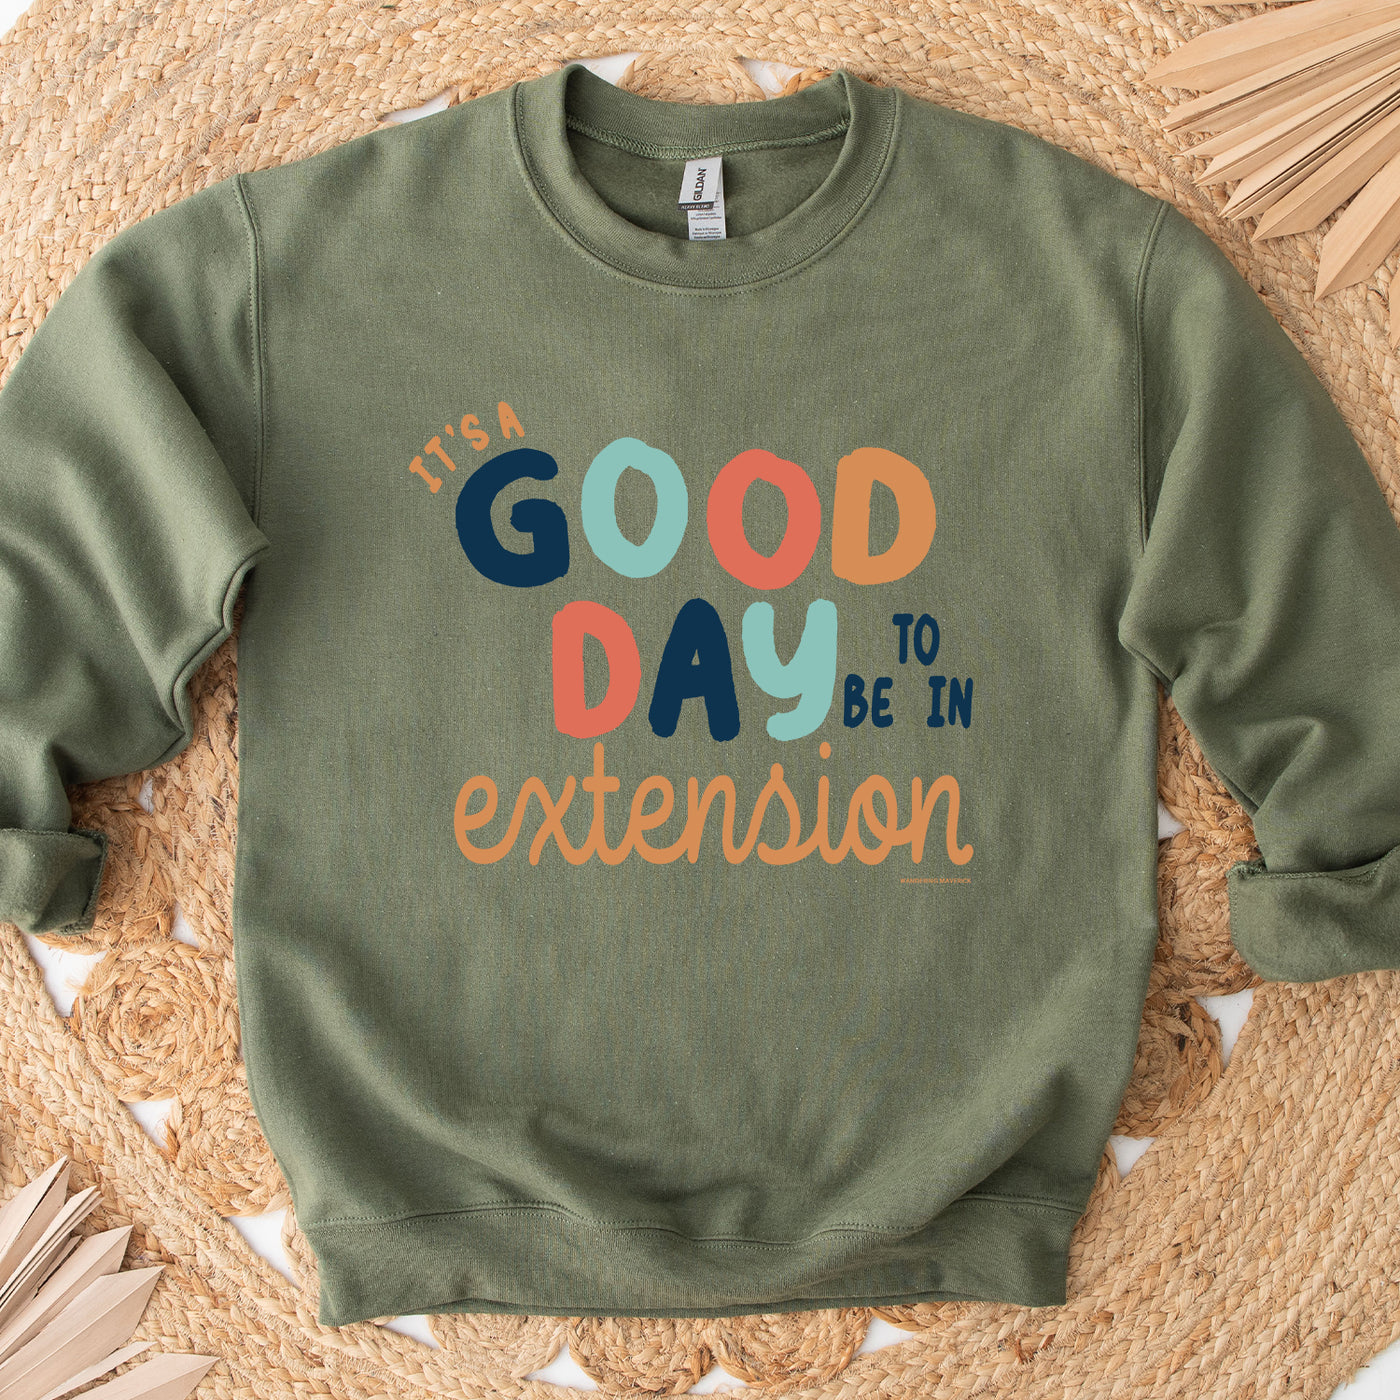 It's a good day to be in extension Crewneck (S-3XL) - Multiple Colors!